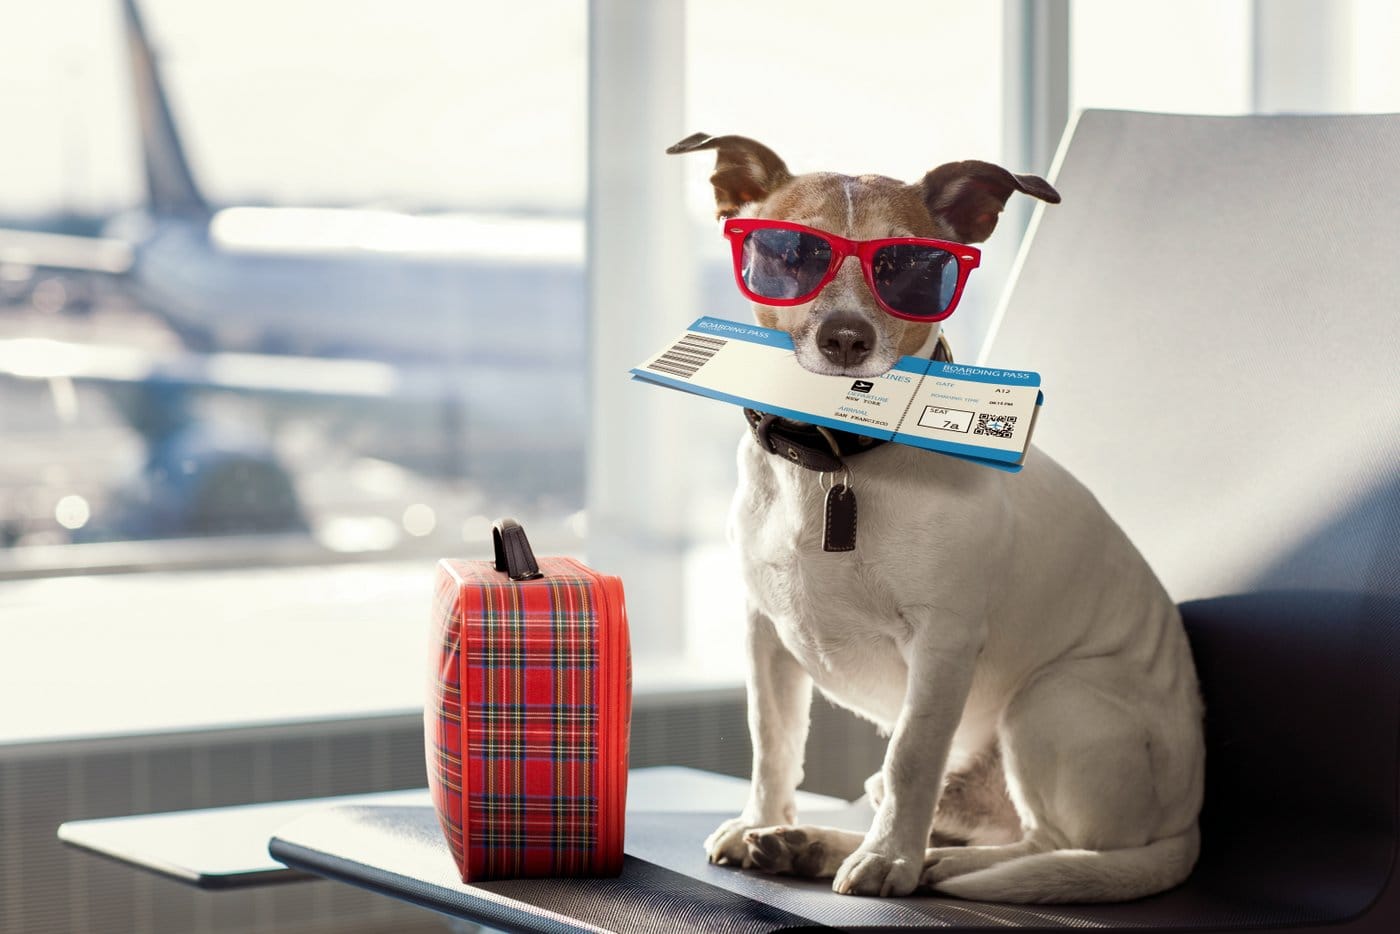 Dog ready to go on an airplane - sunglasses and a suitcase